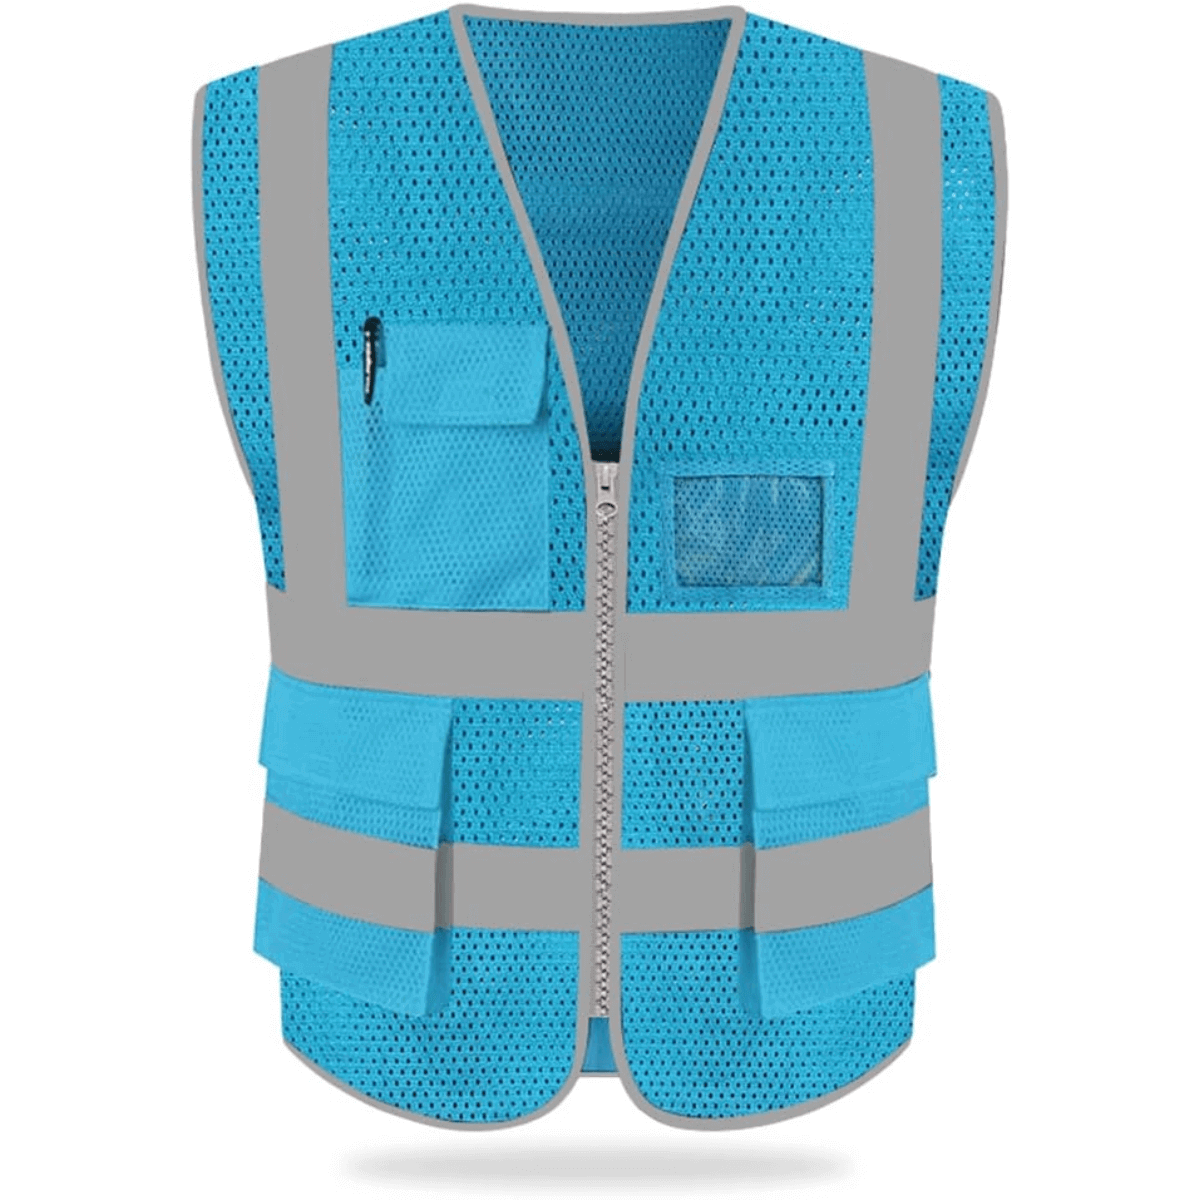 NYOrtho High Visibility reflective Vest - Breathable Mesh Security Mesh  Jacket Lightweight, Does Not Sweat, ANSI/ISEA Class 2